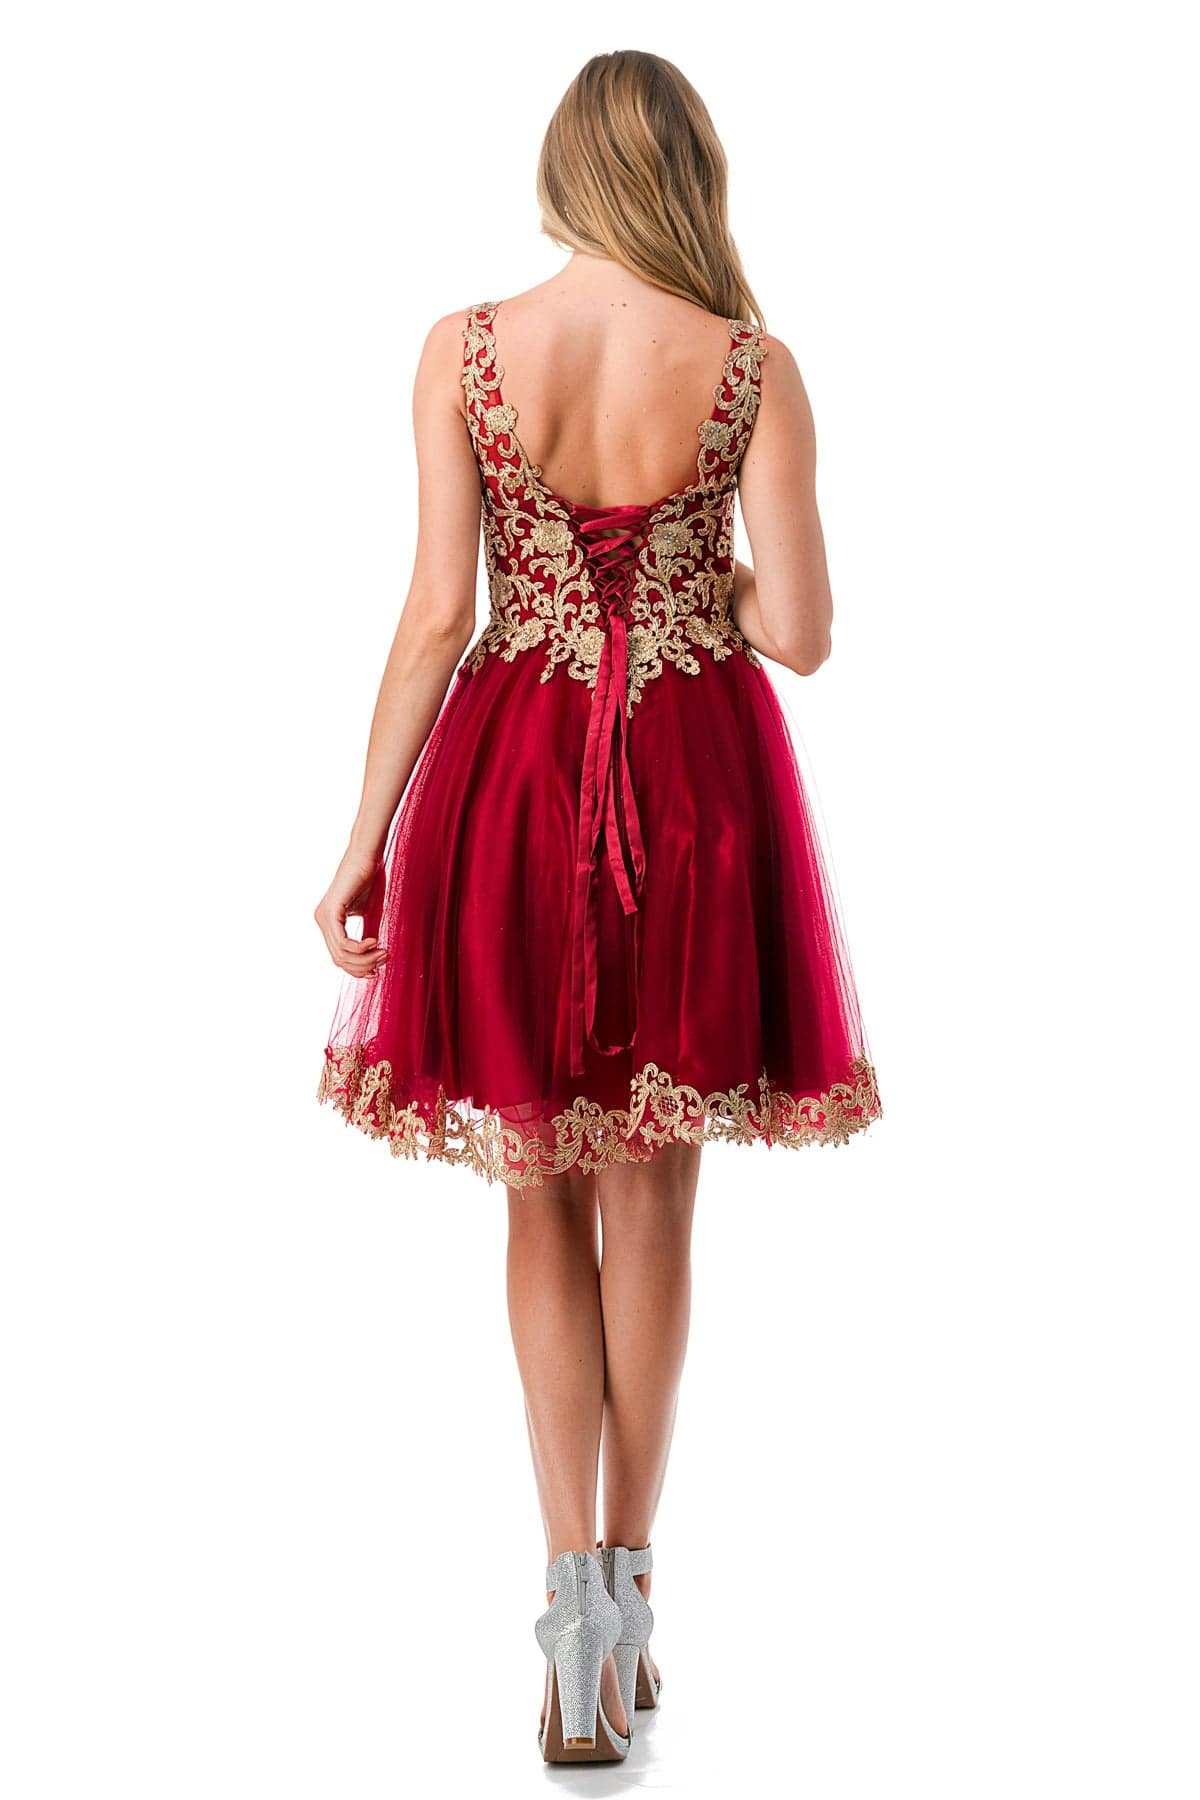 Aspeed S2738J Floral Short Dress with Tulle Skirt - NORMA REED